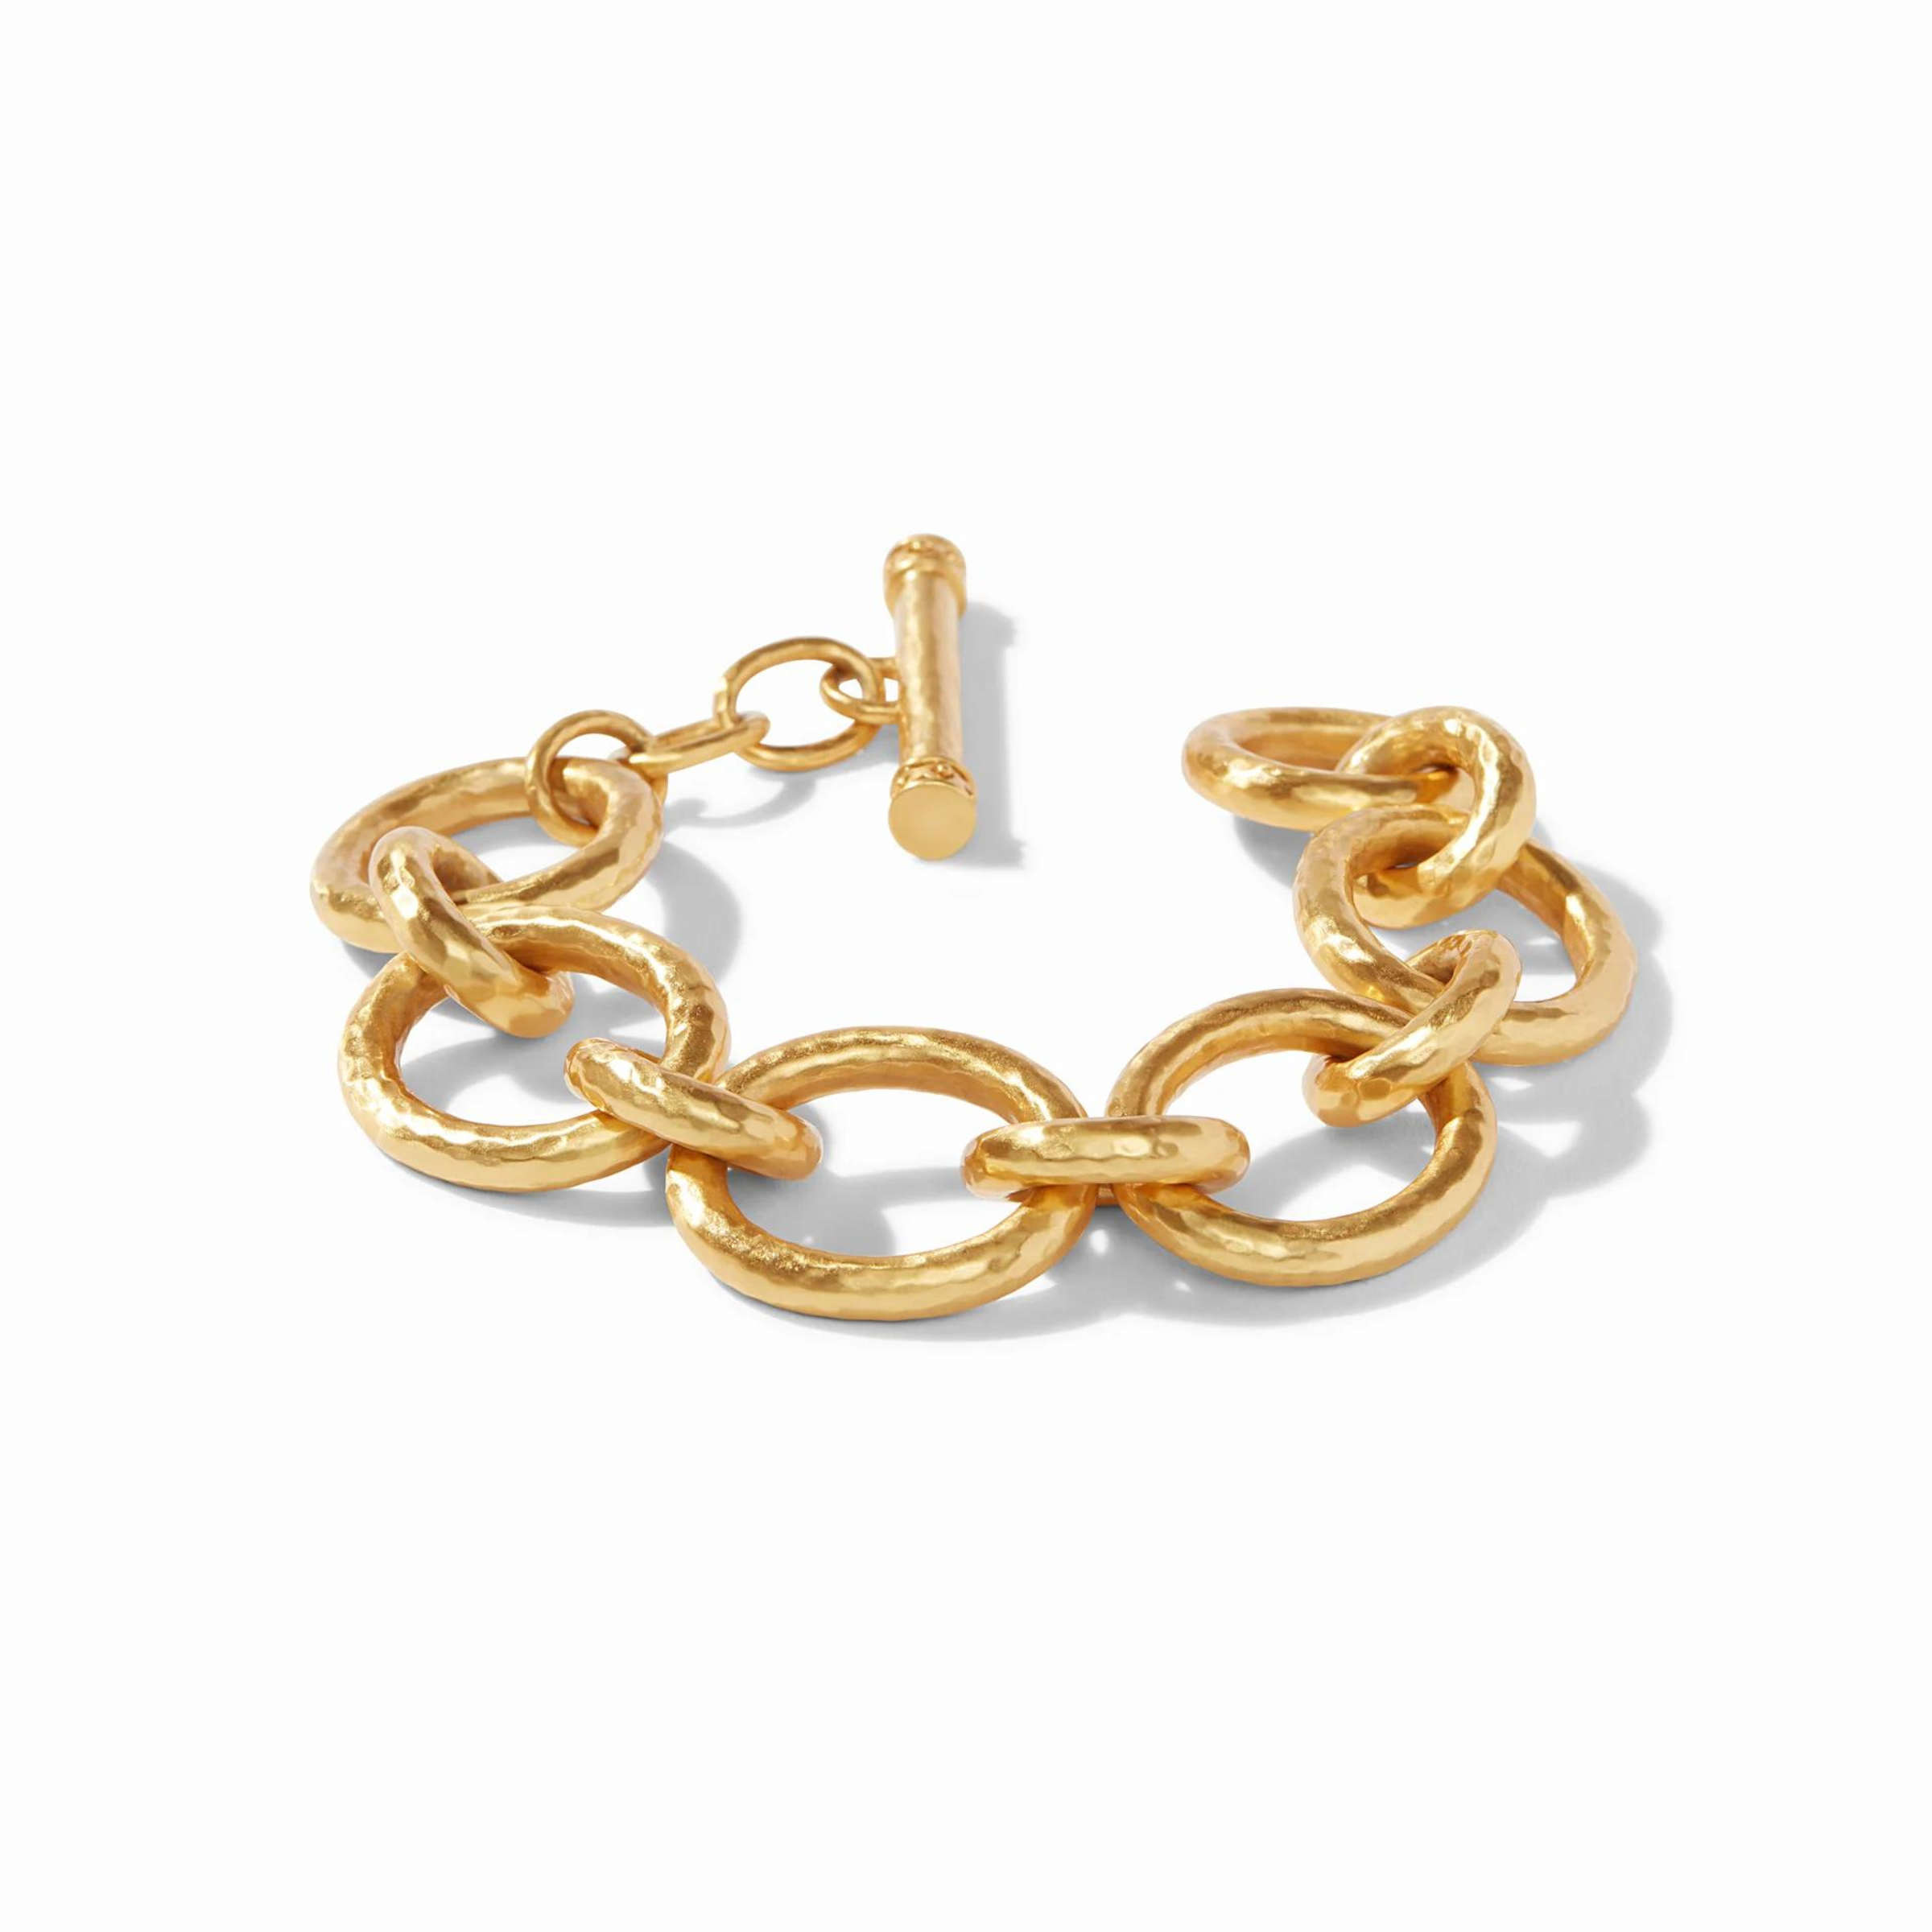 Gold, hammered chain link bracelet with toggle clasp pictured on a white background. 